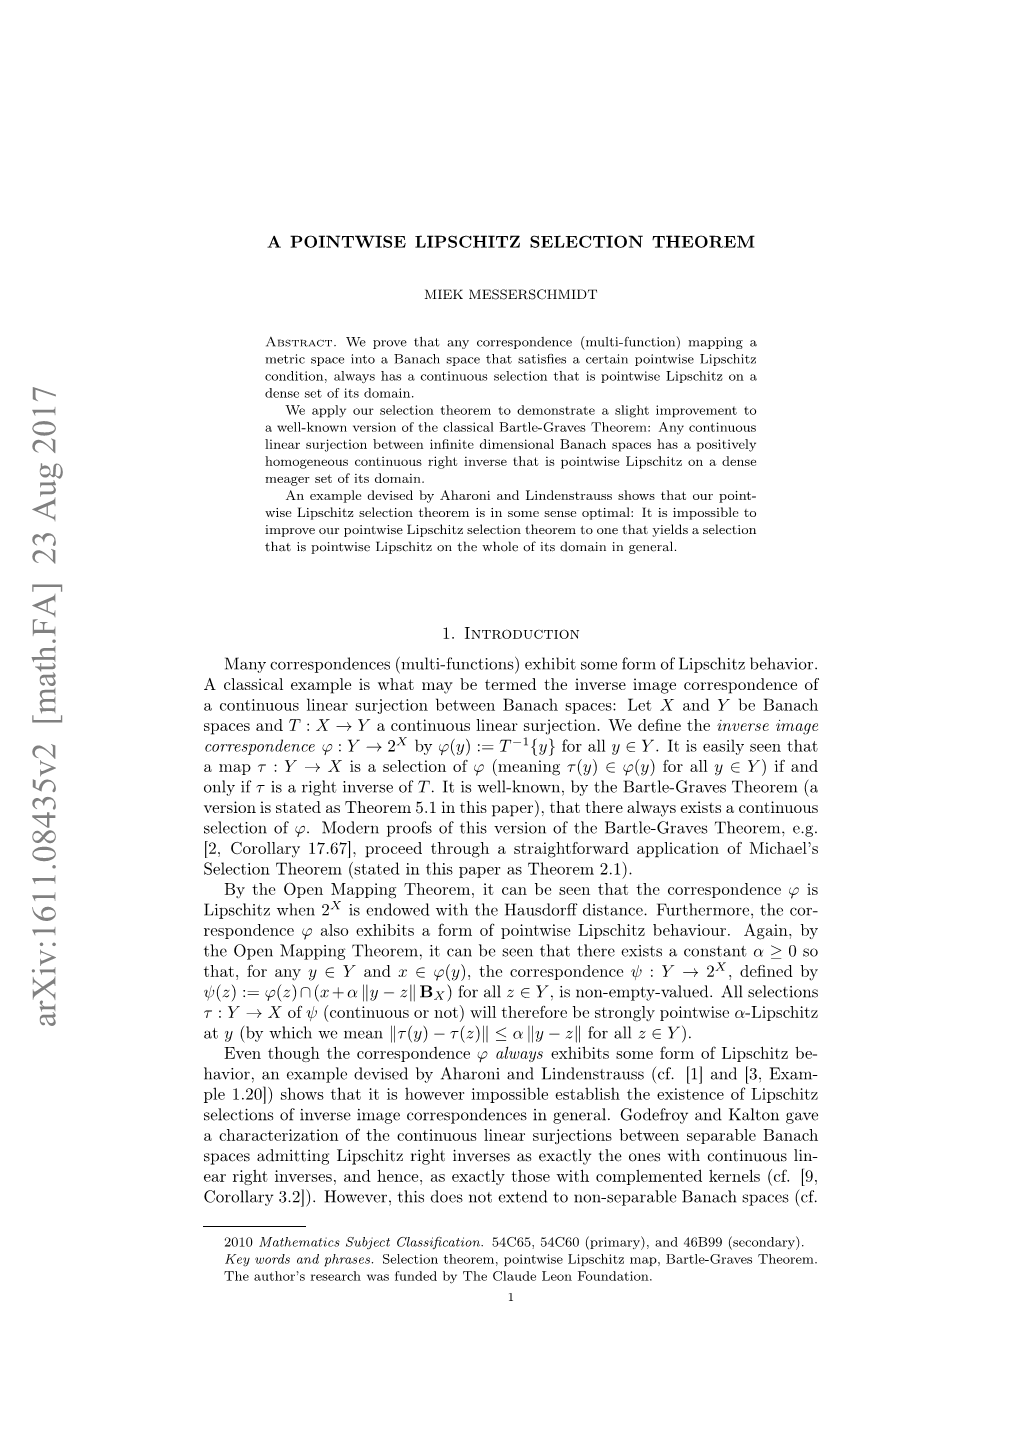 A Pointwise Lipschitz Selection Theorem in This Section We Will Prove Our Pointwise Lipschitz Selection Theorem (Theo- Rem 3.4)